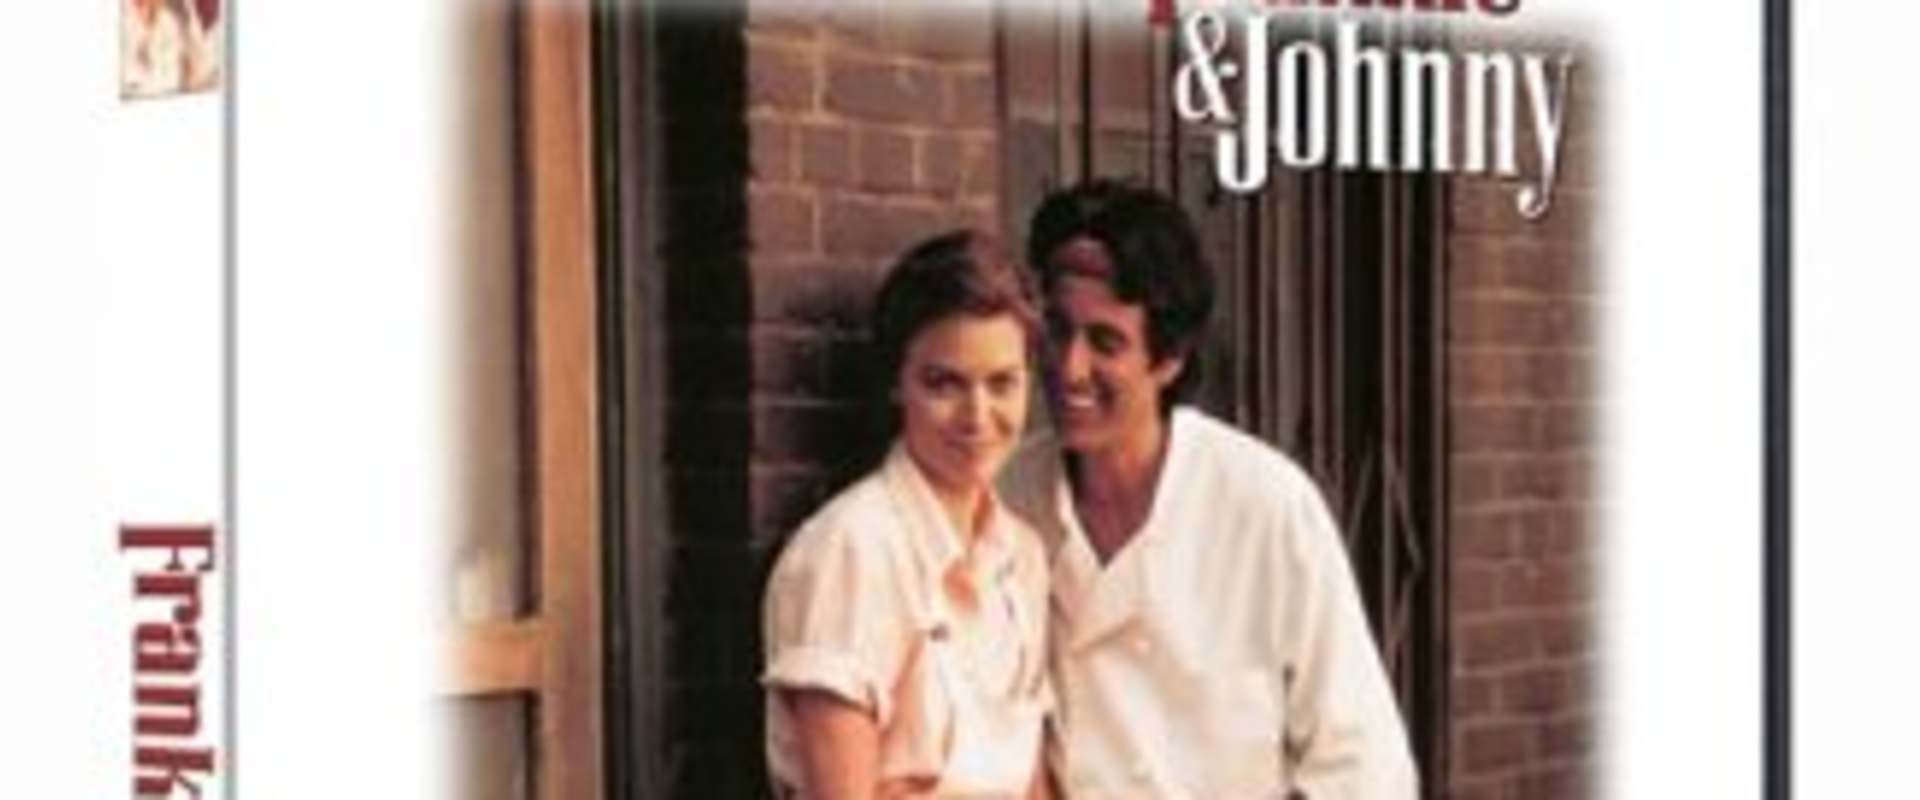 Frankie and Johnny background 2